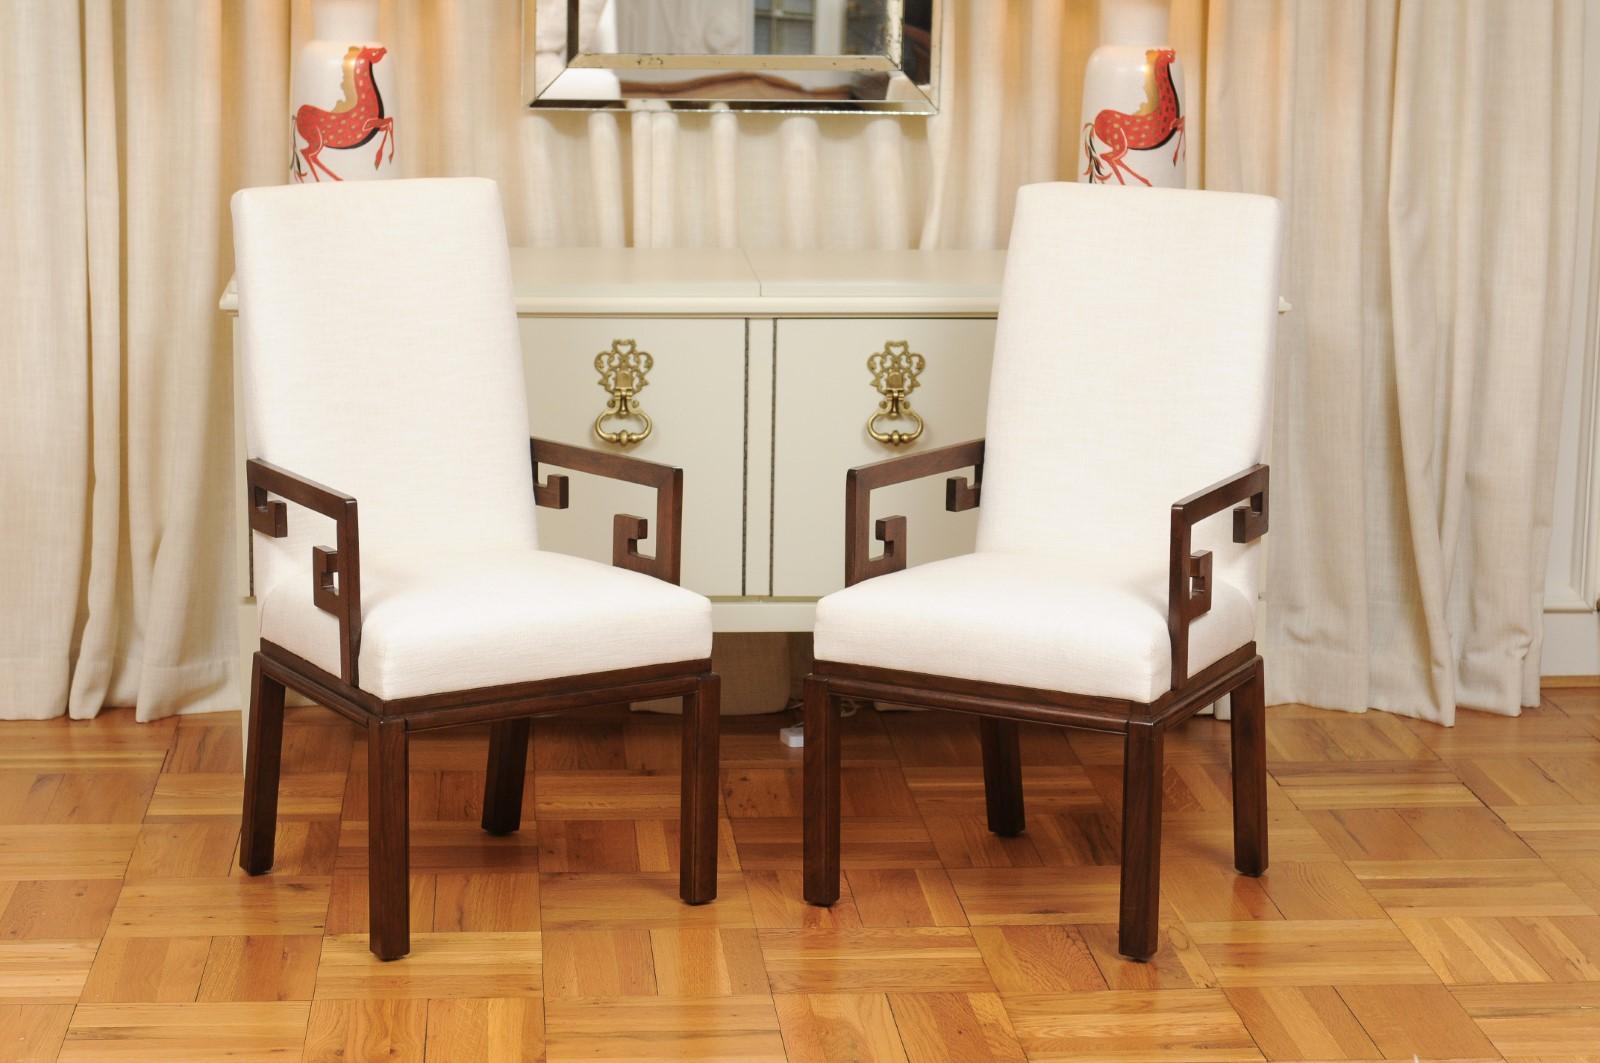 All Arms, Sublime Set of 12 Greek Key Chairs by Michael Taylor, circa 1970 For Sale 8